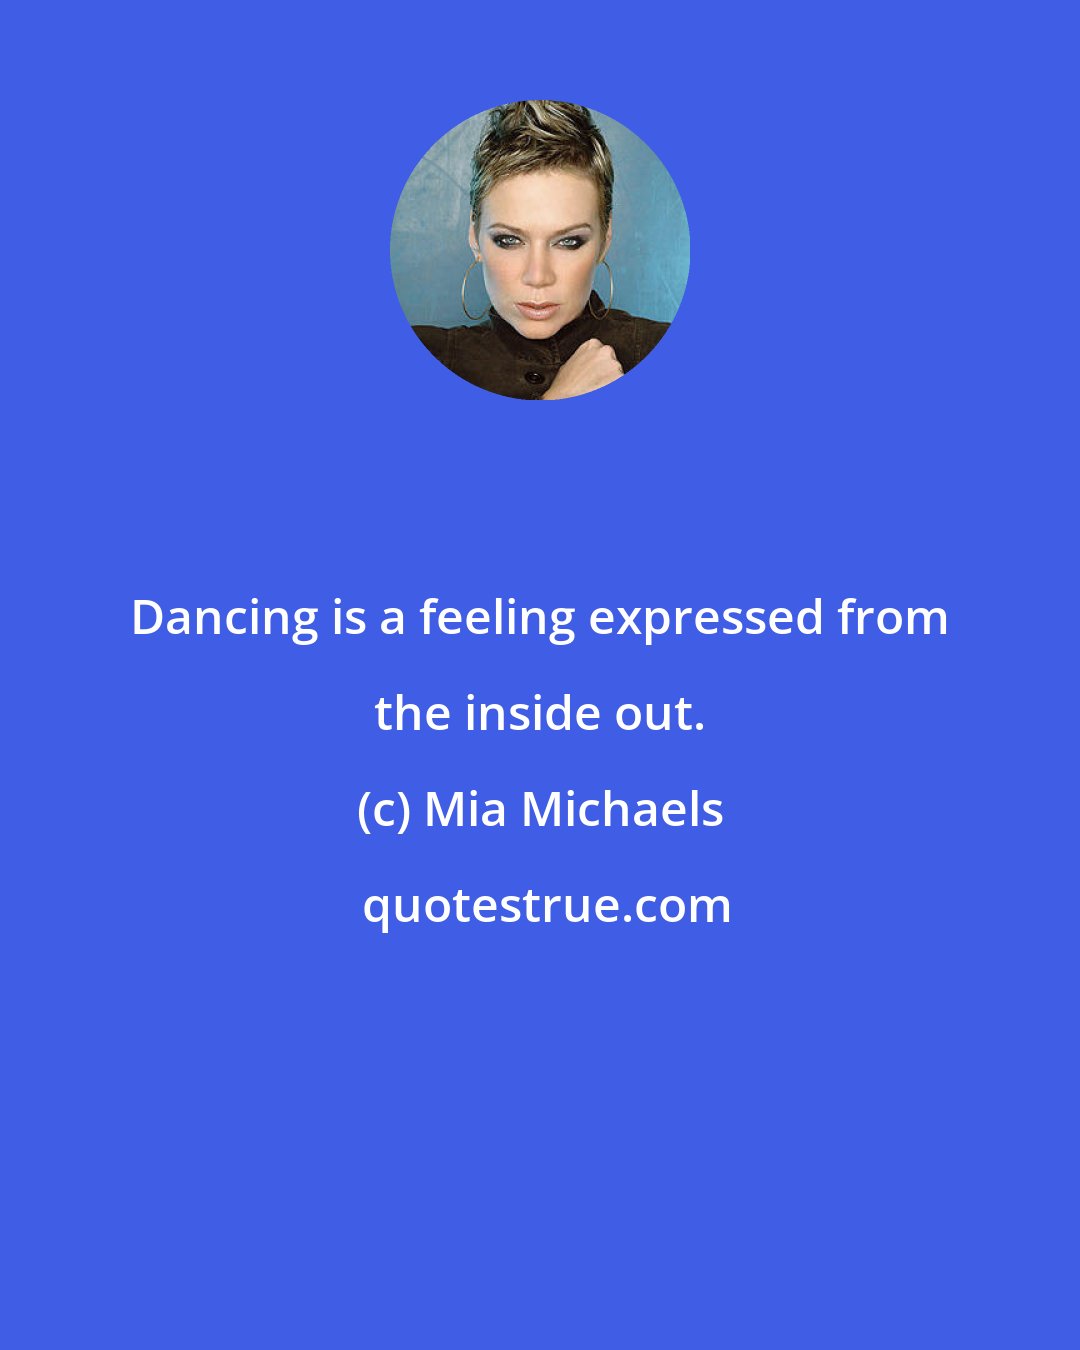 Mia Michaels: Dancing is a feeling expressed from the inside out.